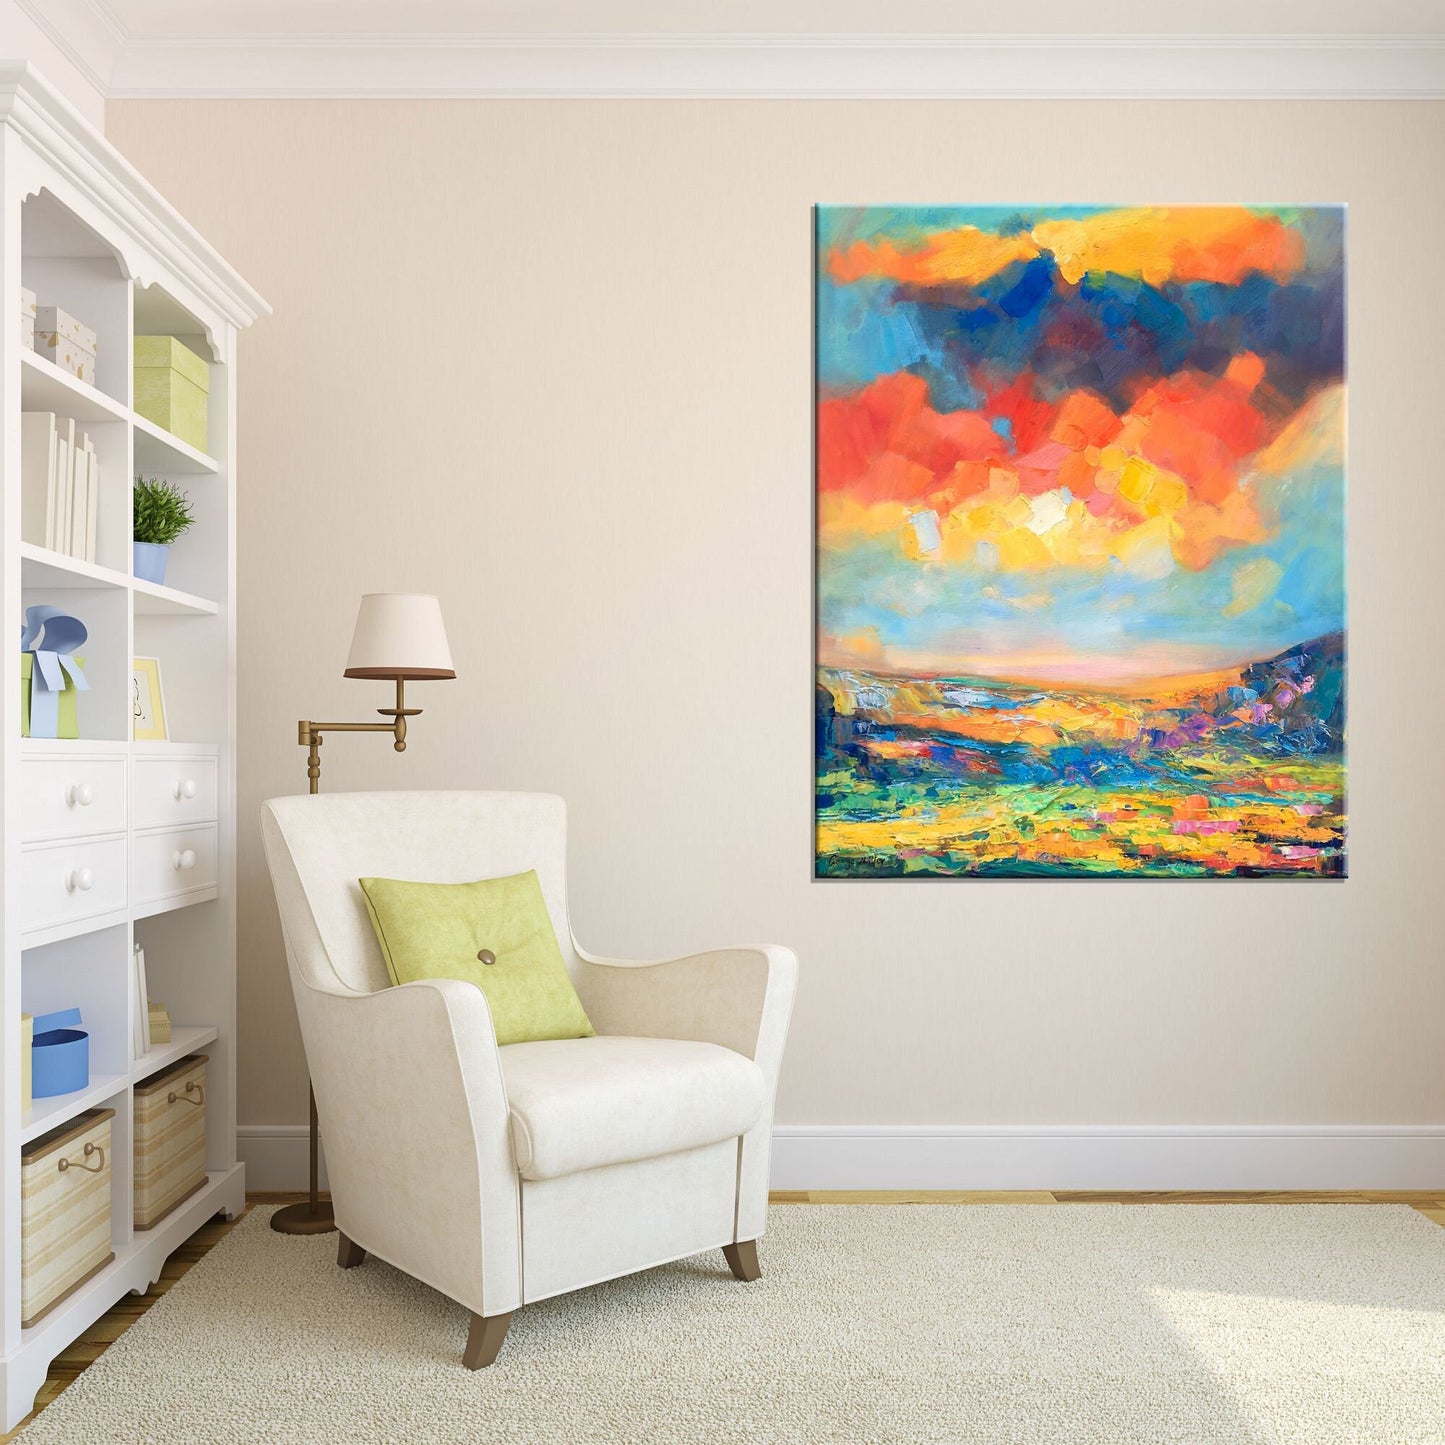 Abstract Landscape Oil Painting, Canvas Painting, Paintings On Canvas, Landscape Wall Art, Oversized Paintings On Canvas, Handmade